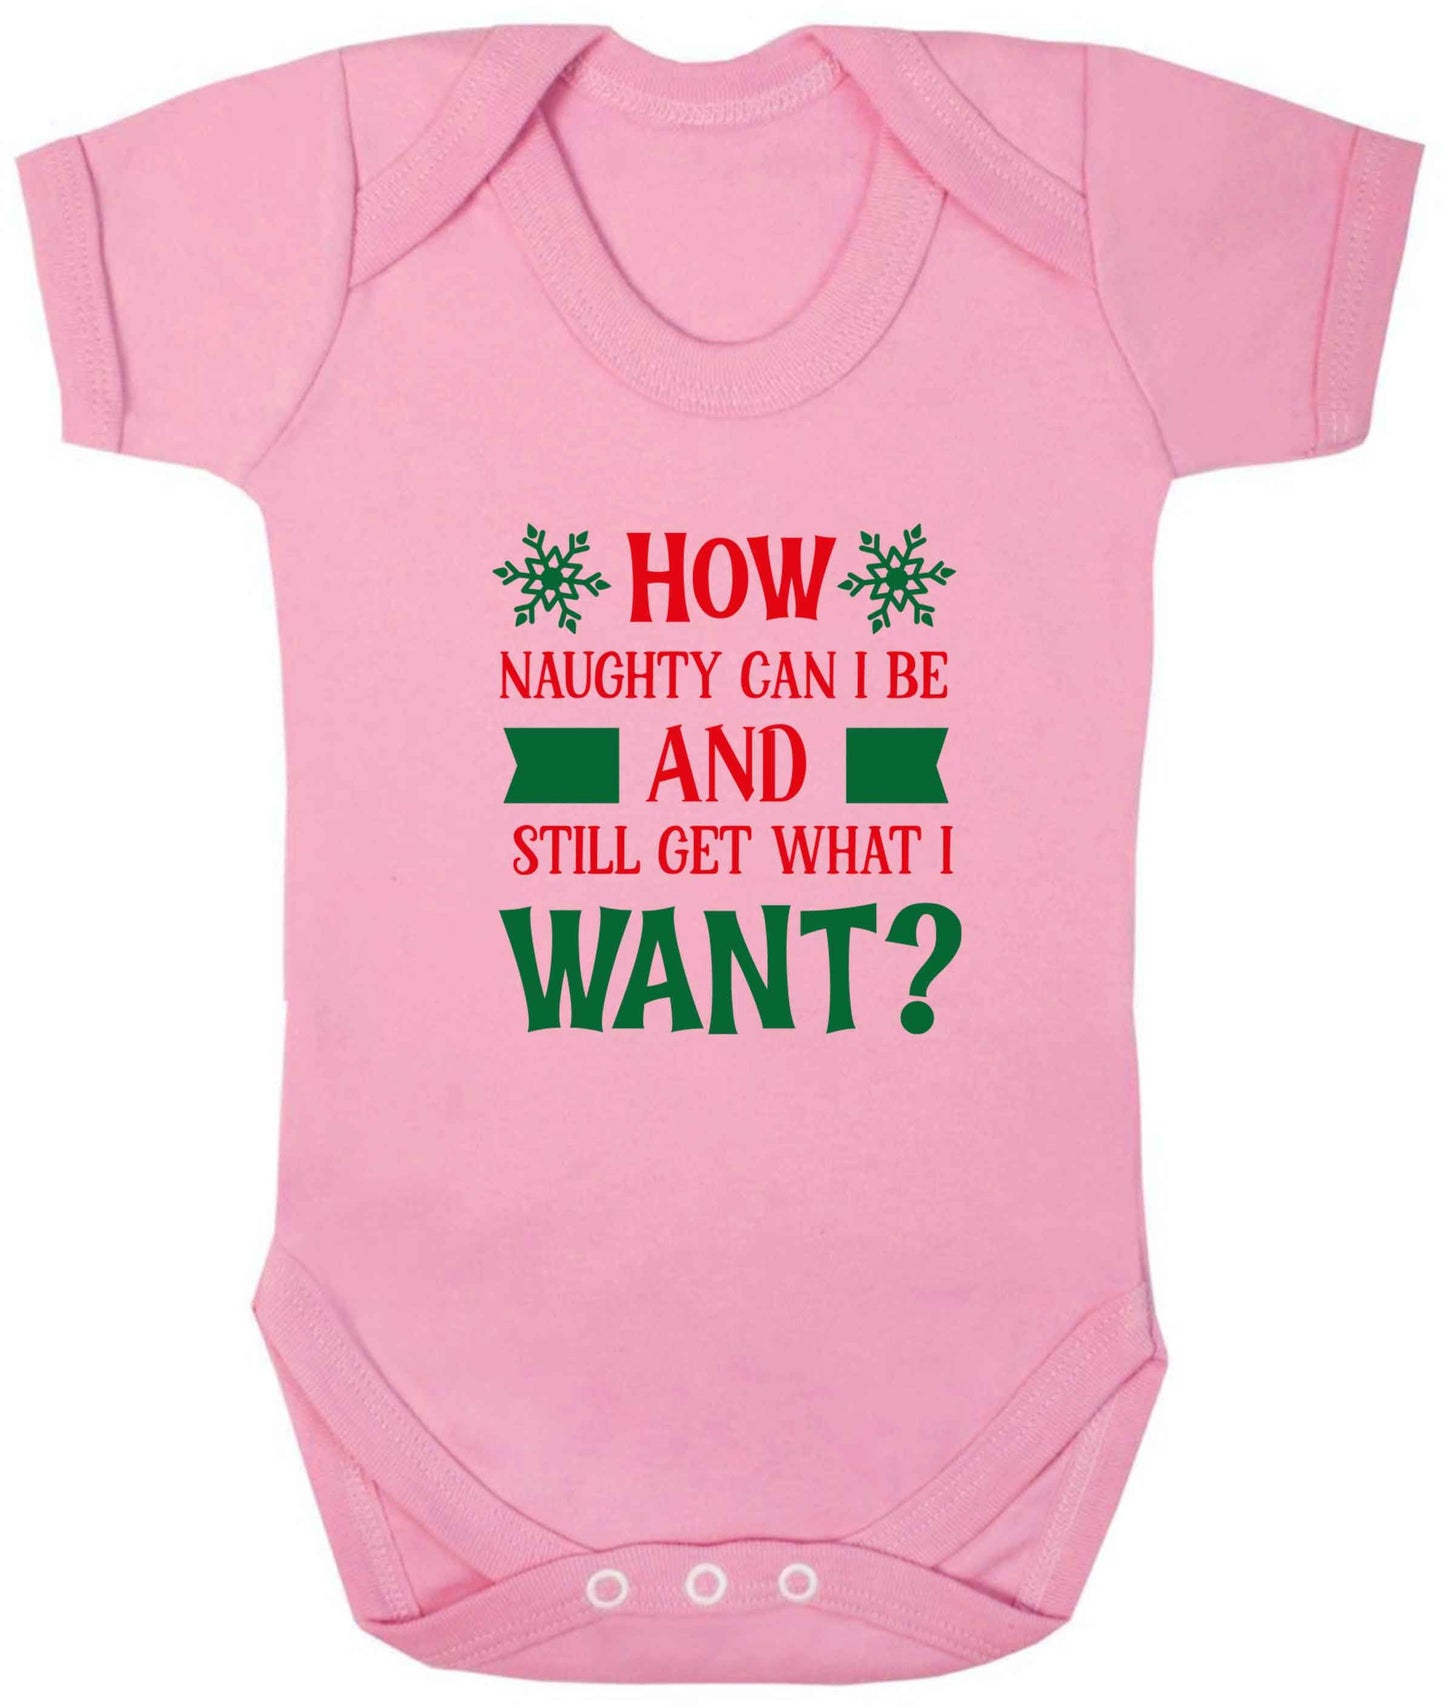 How naughty can I be and still get what I want? baby vest pale pink 18-24 months